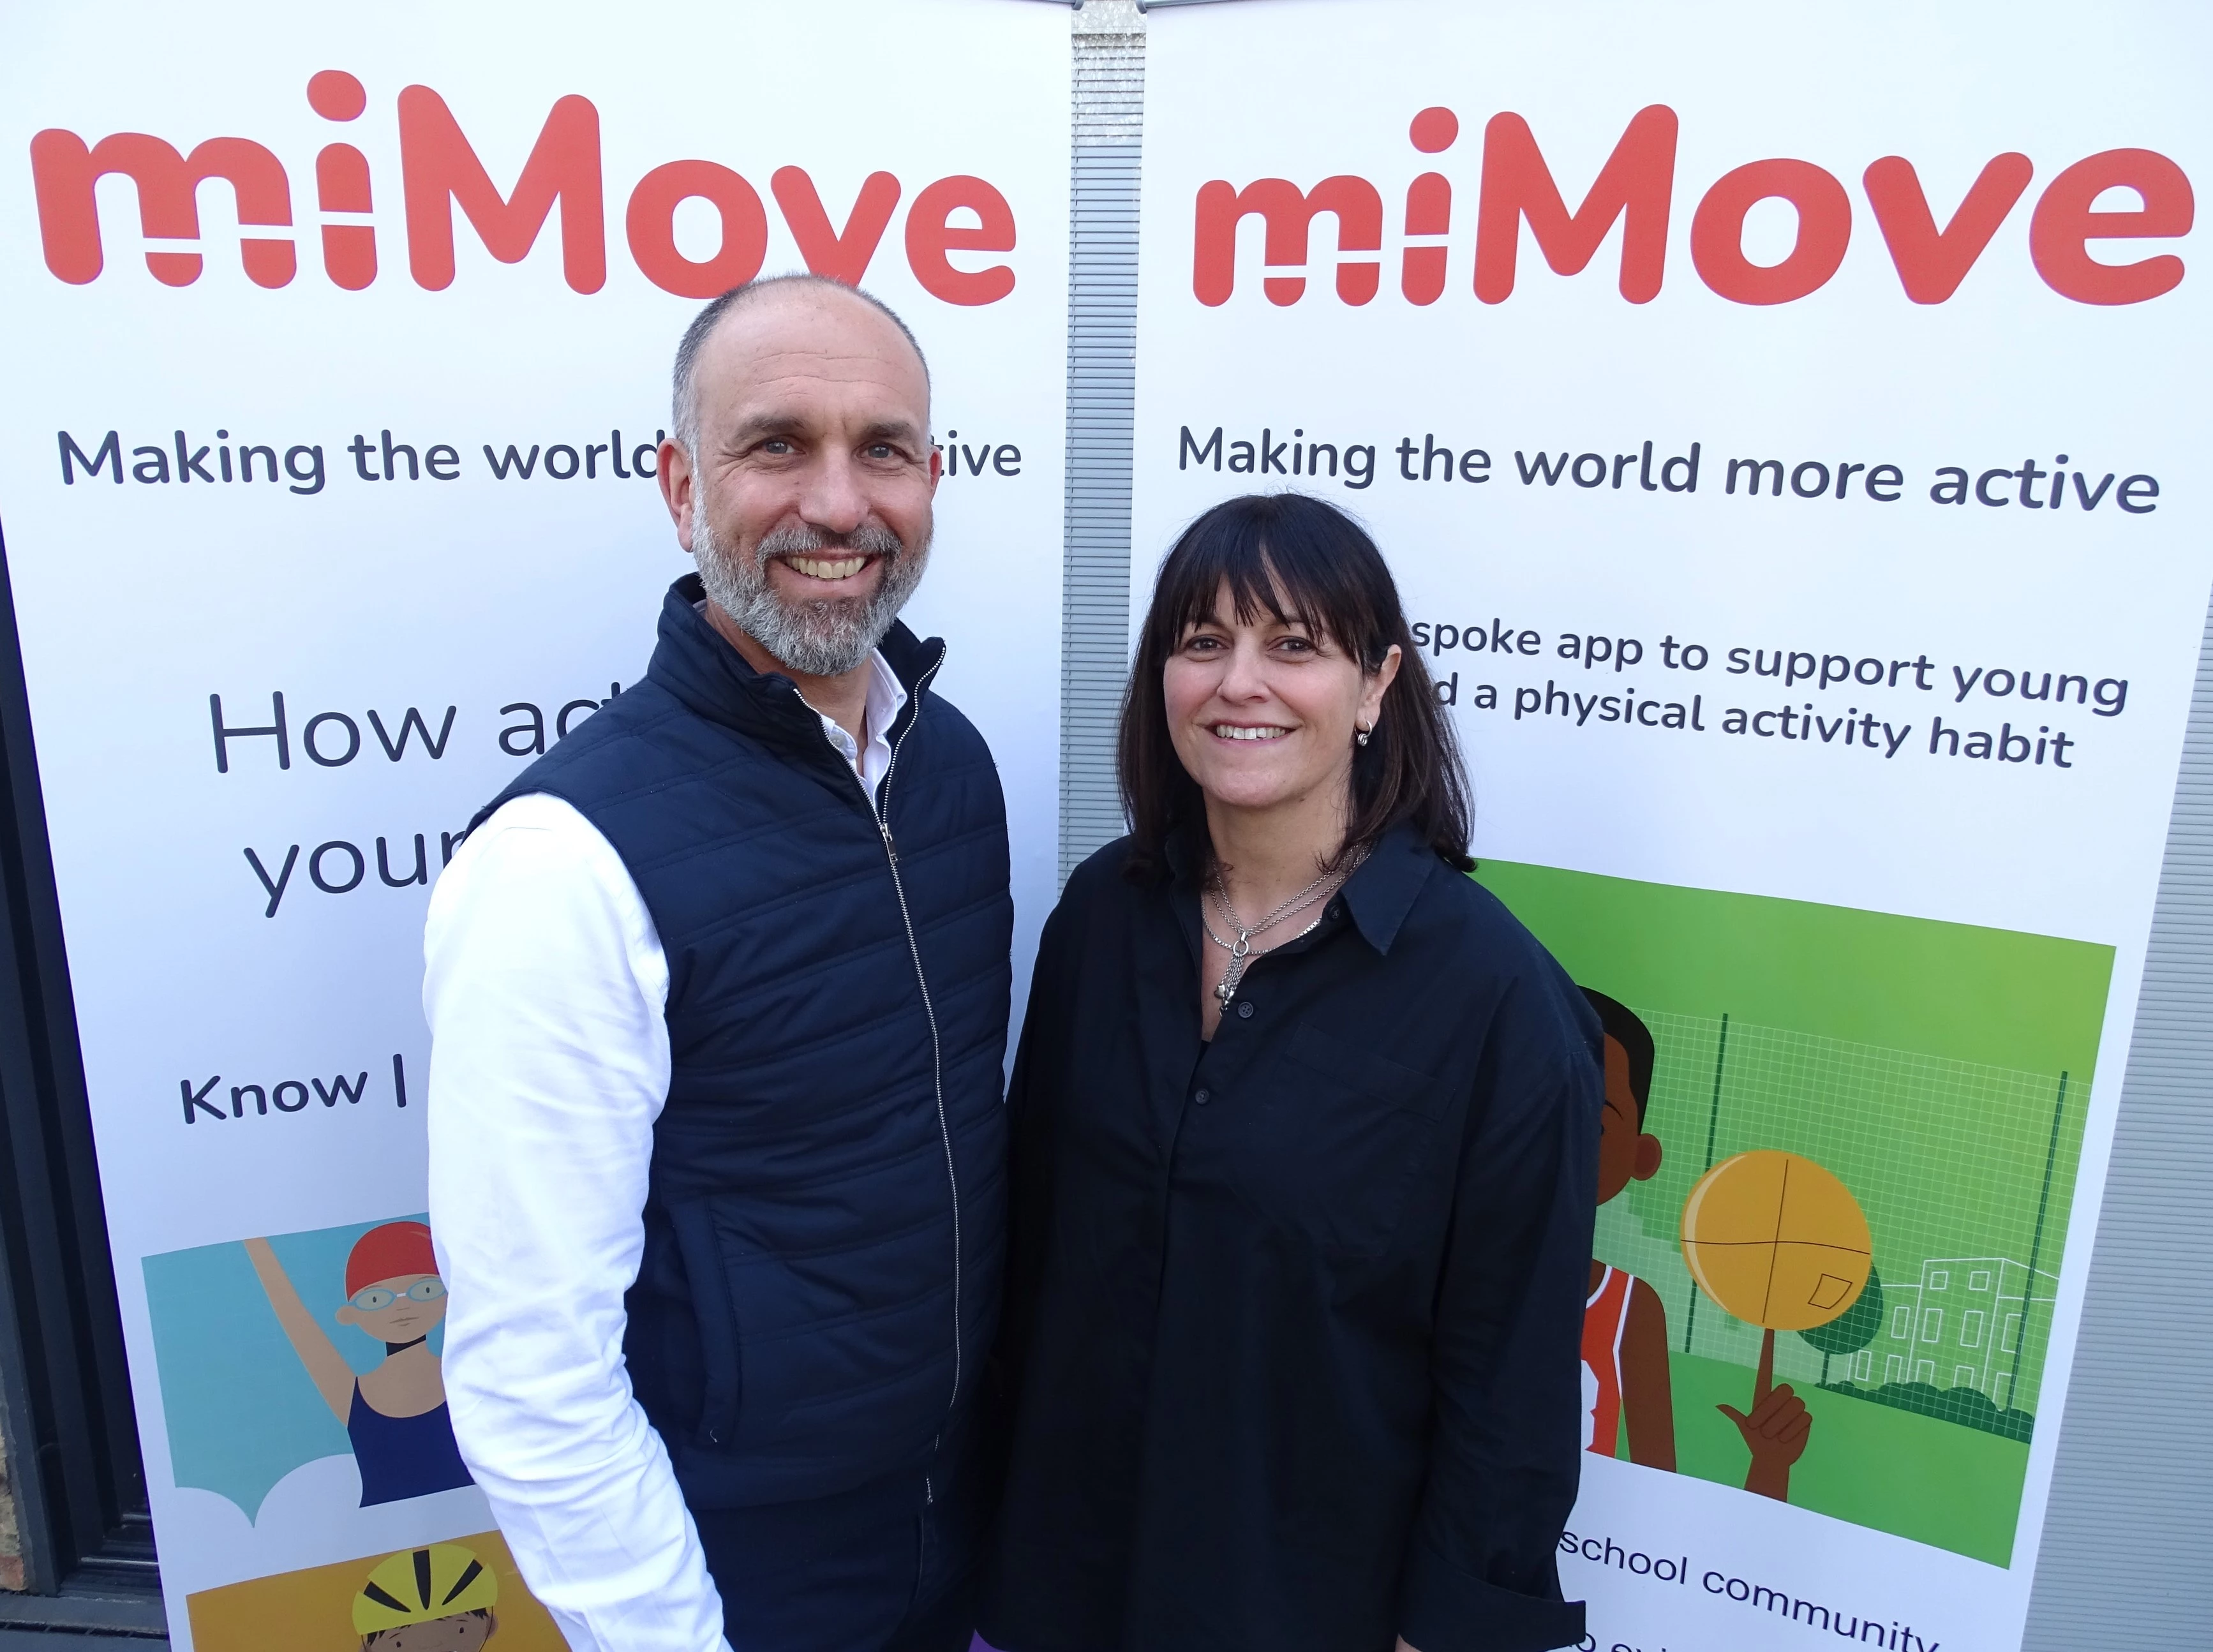 miMove founders Greg Dryer and Marcella Griso